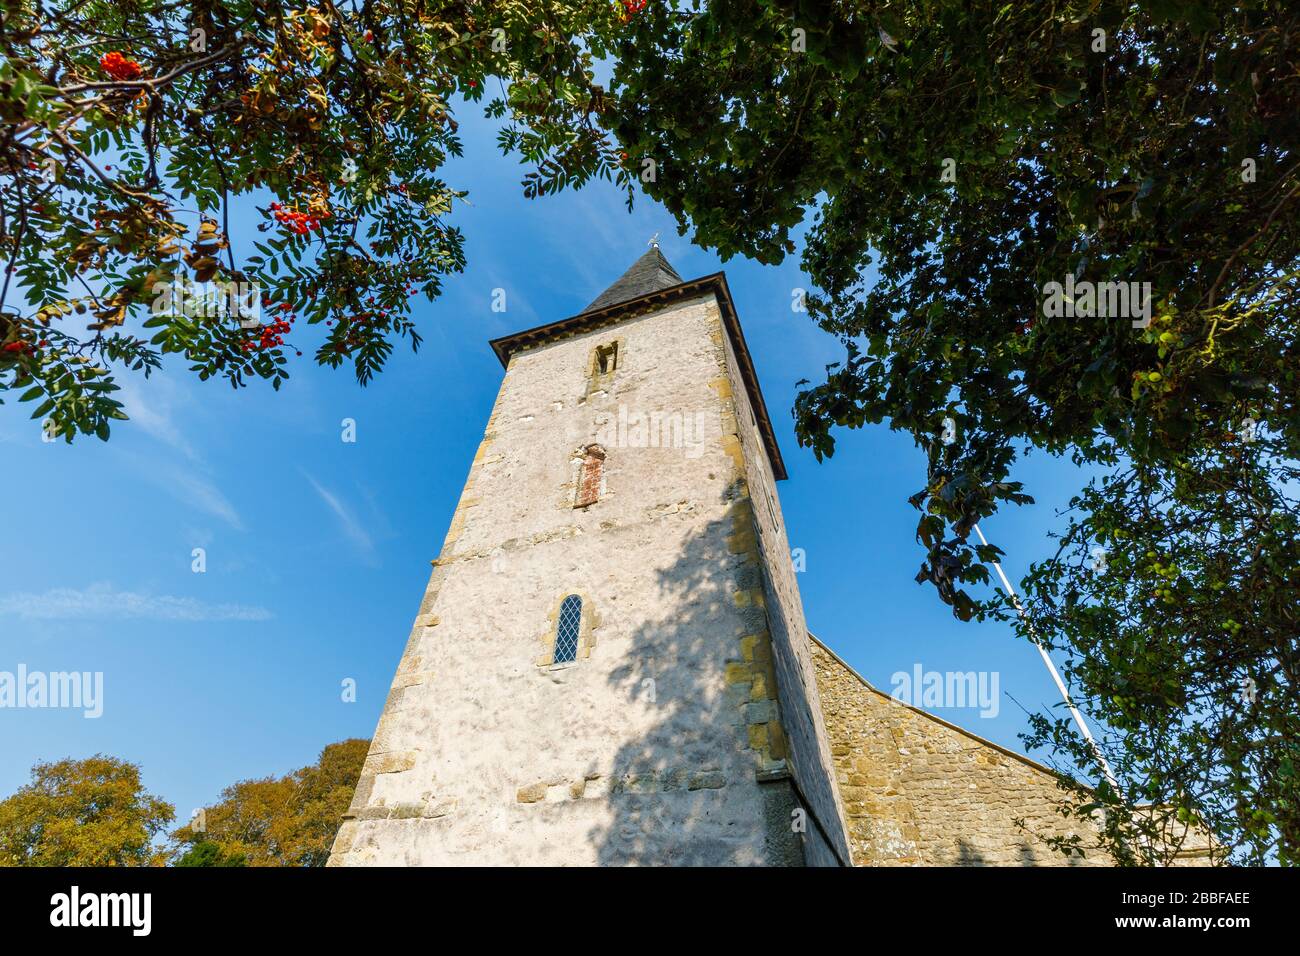 Holy Trinity Church, a Grade 1 listed historic building in Bosham, a small village in Chichester Harbour, West Sussex, on the south coast of England Stock Photo